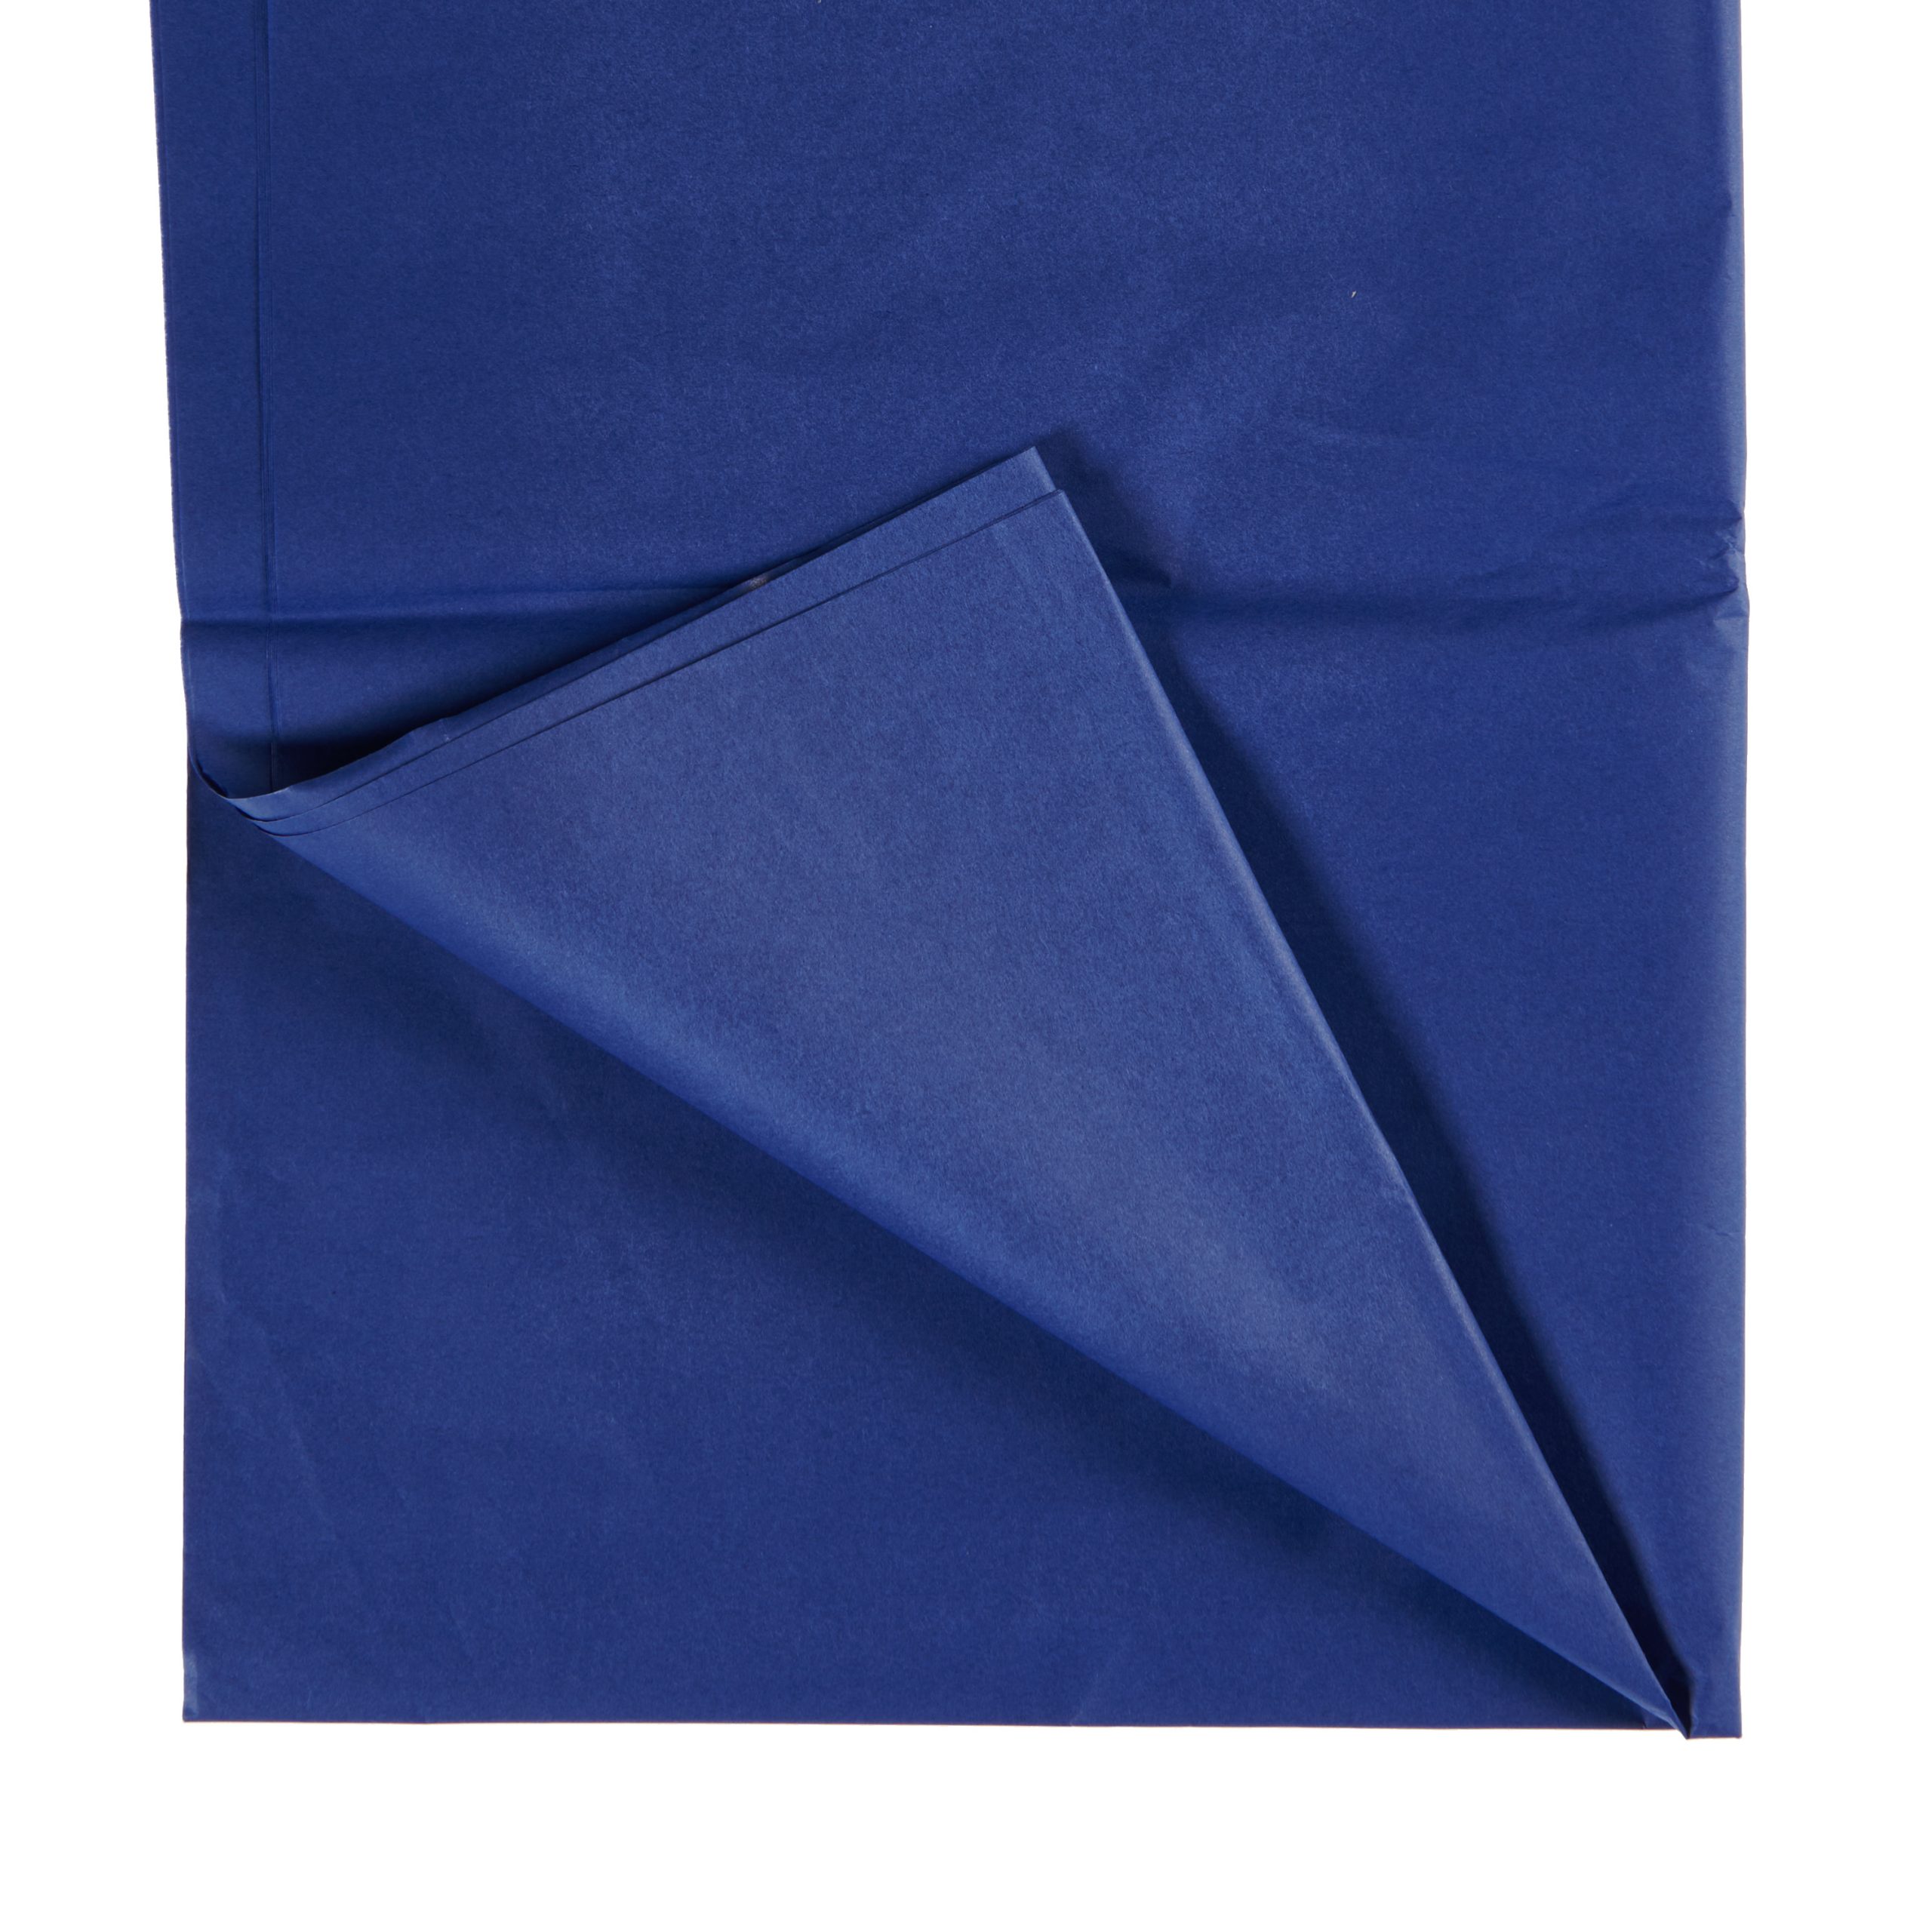 250 SHEETS OF ROYAL BLUE ACID FREE TISSUE PAPER 500mm x 750mm *HIGH QUALITY* 